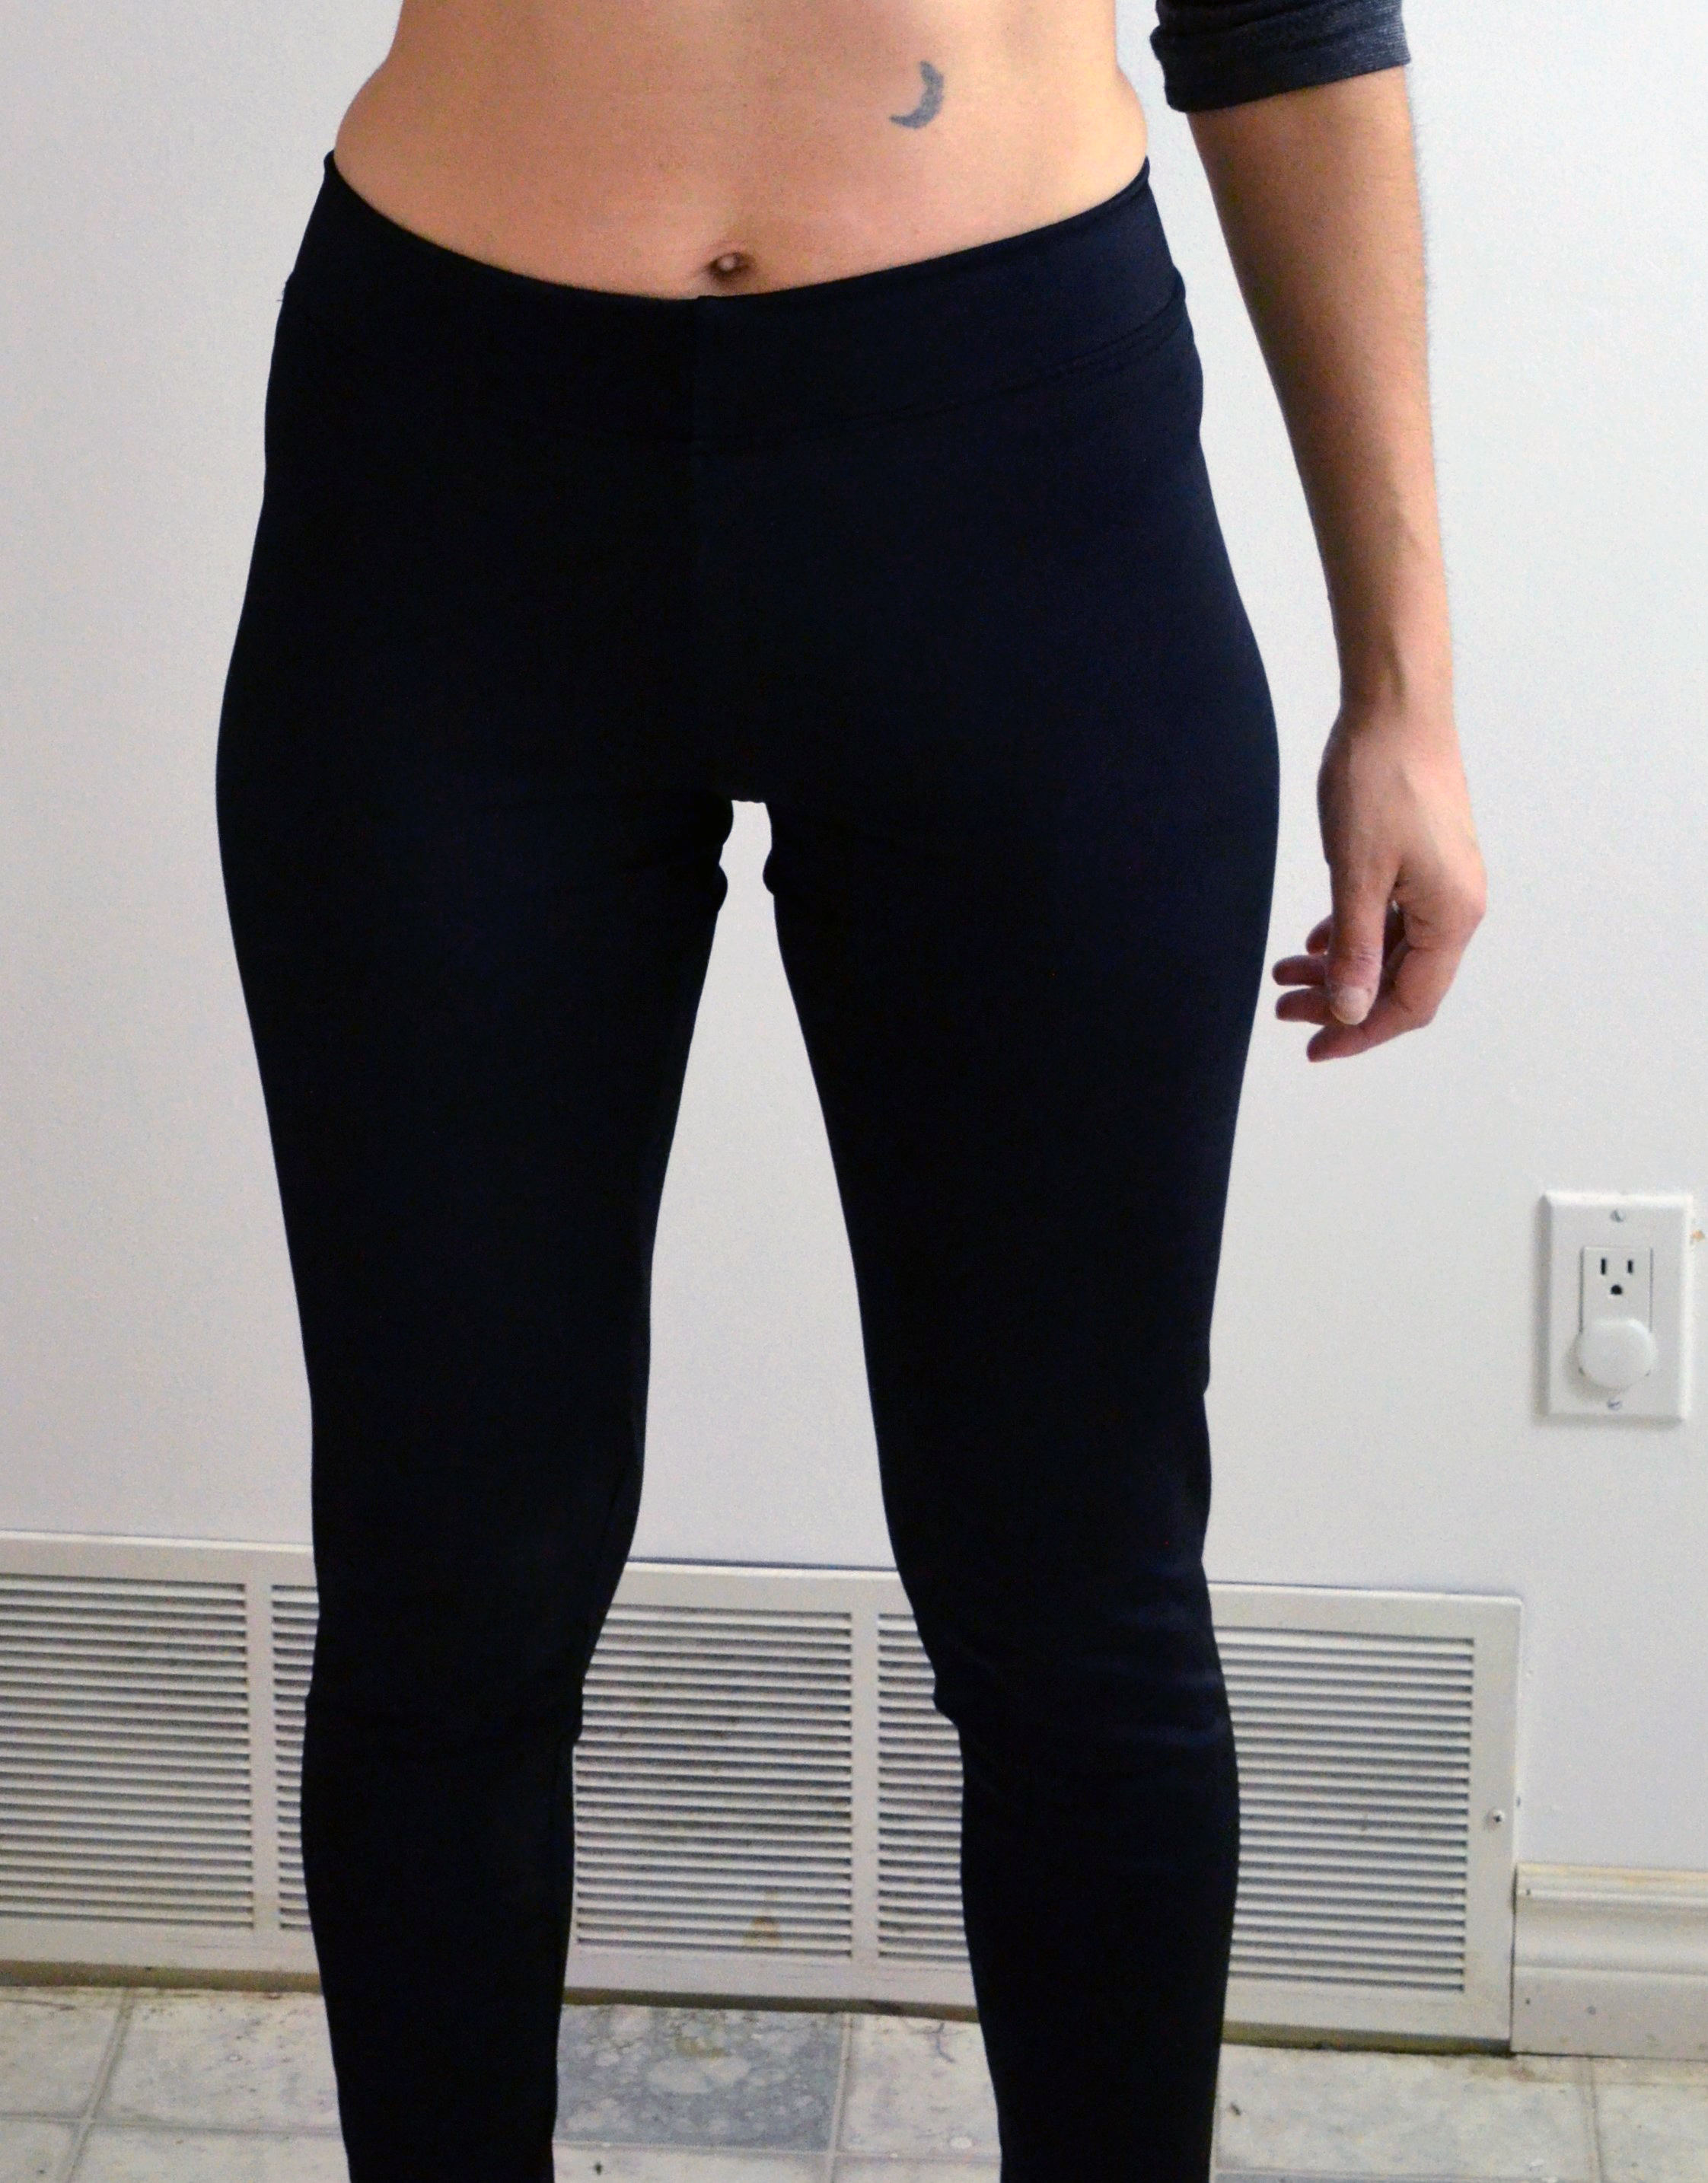 FREE SEWING PATTERN: Easy Everyday Leggings - On the Cutting Floor ...